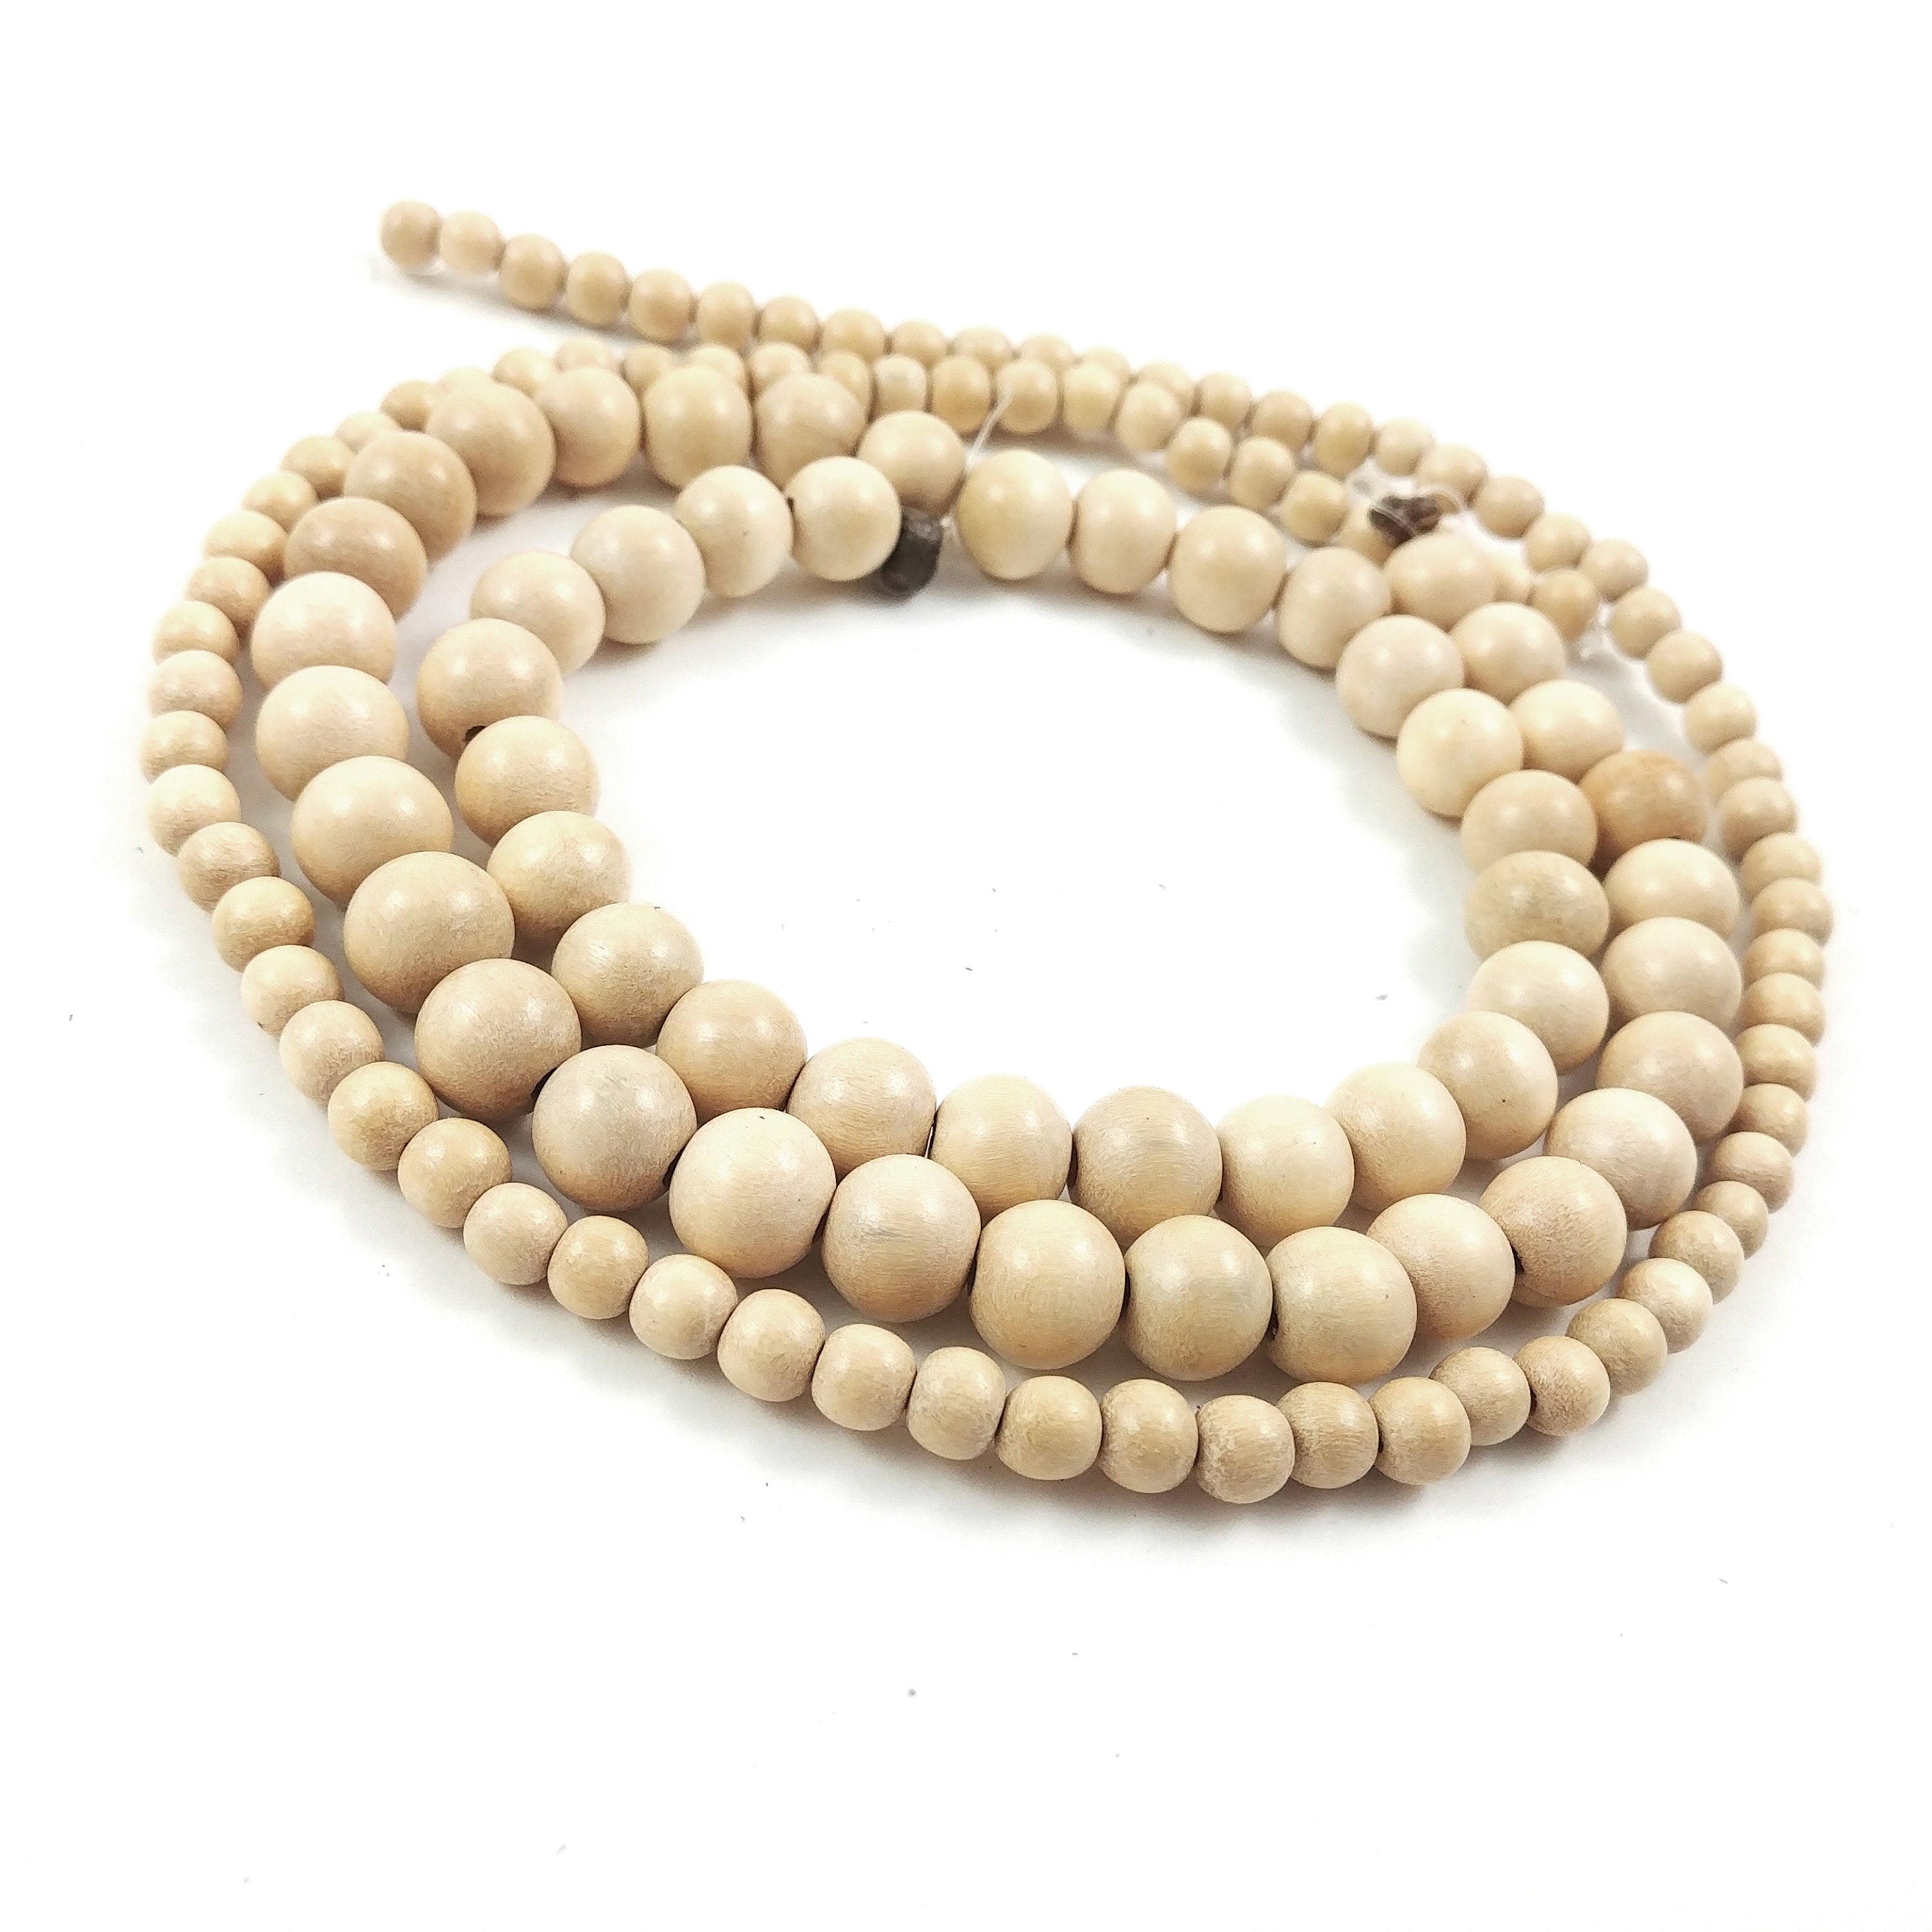 Whitewood 4, 6 or 8mm wood round beads 16 inch strand